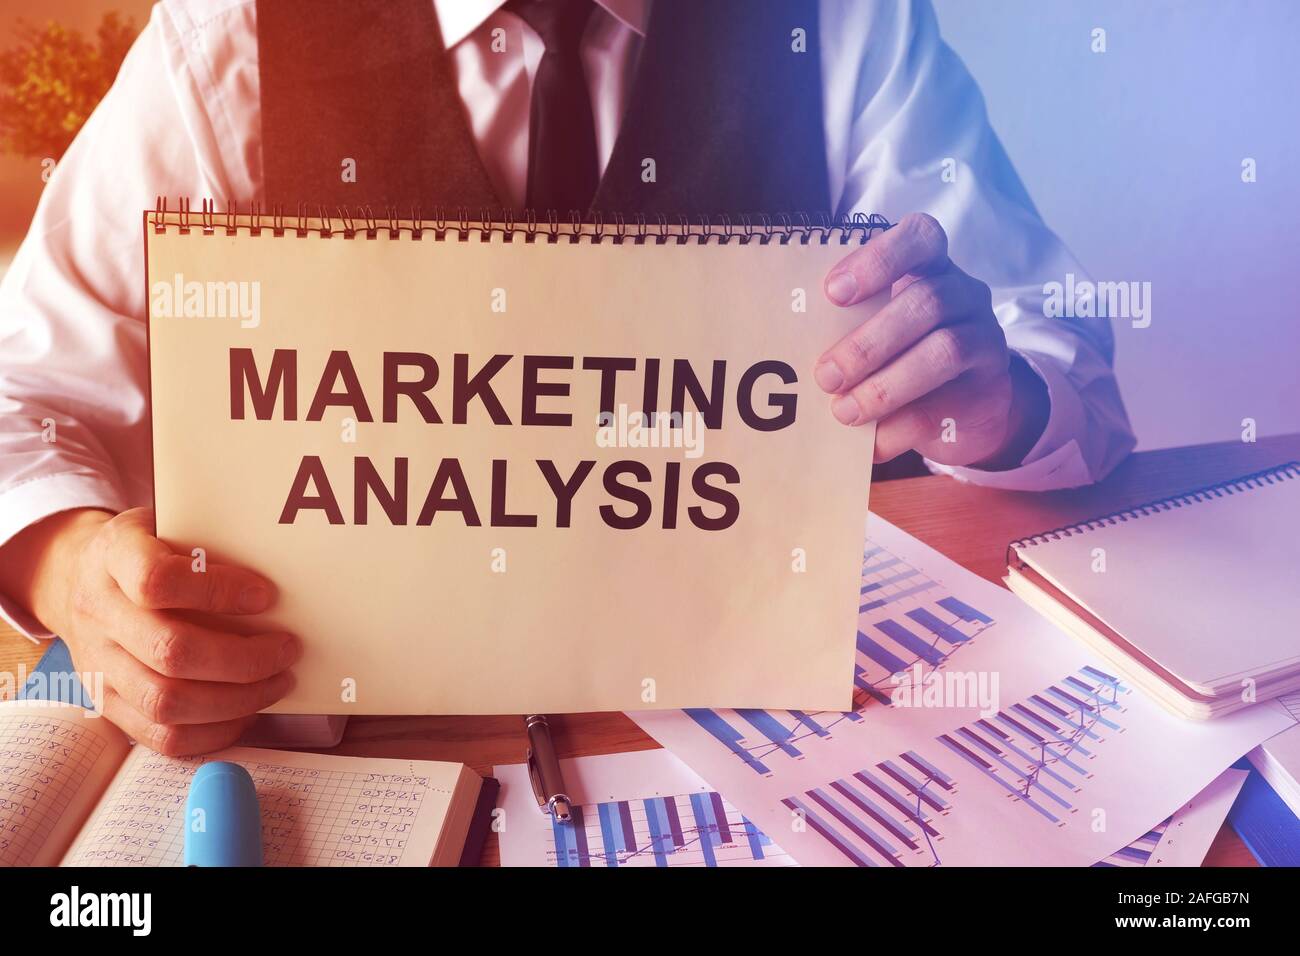 Marketing analysis report and business papers. Stock Photo